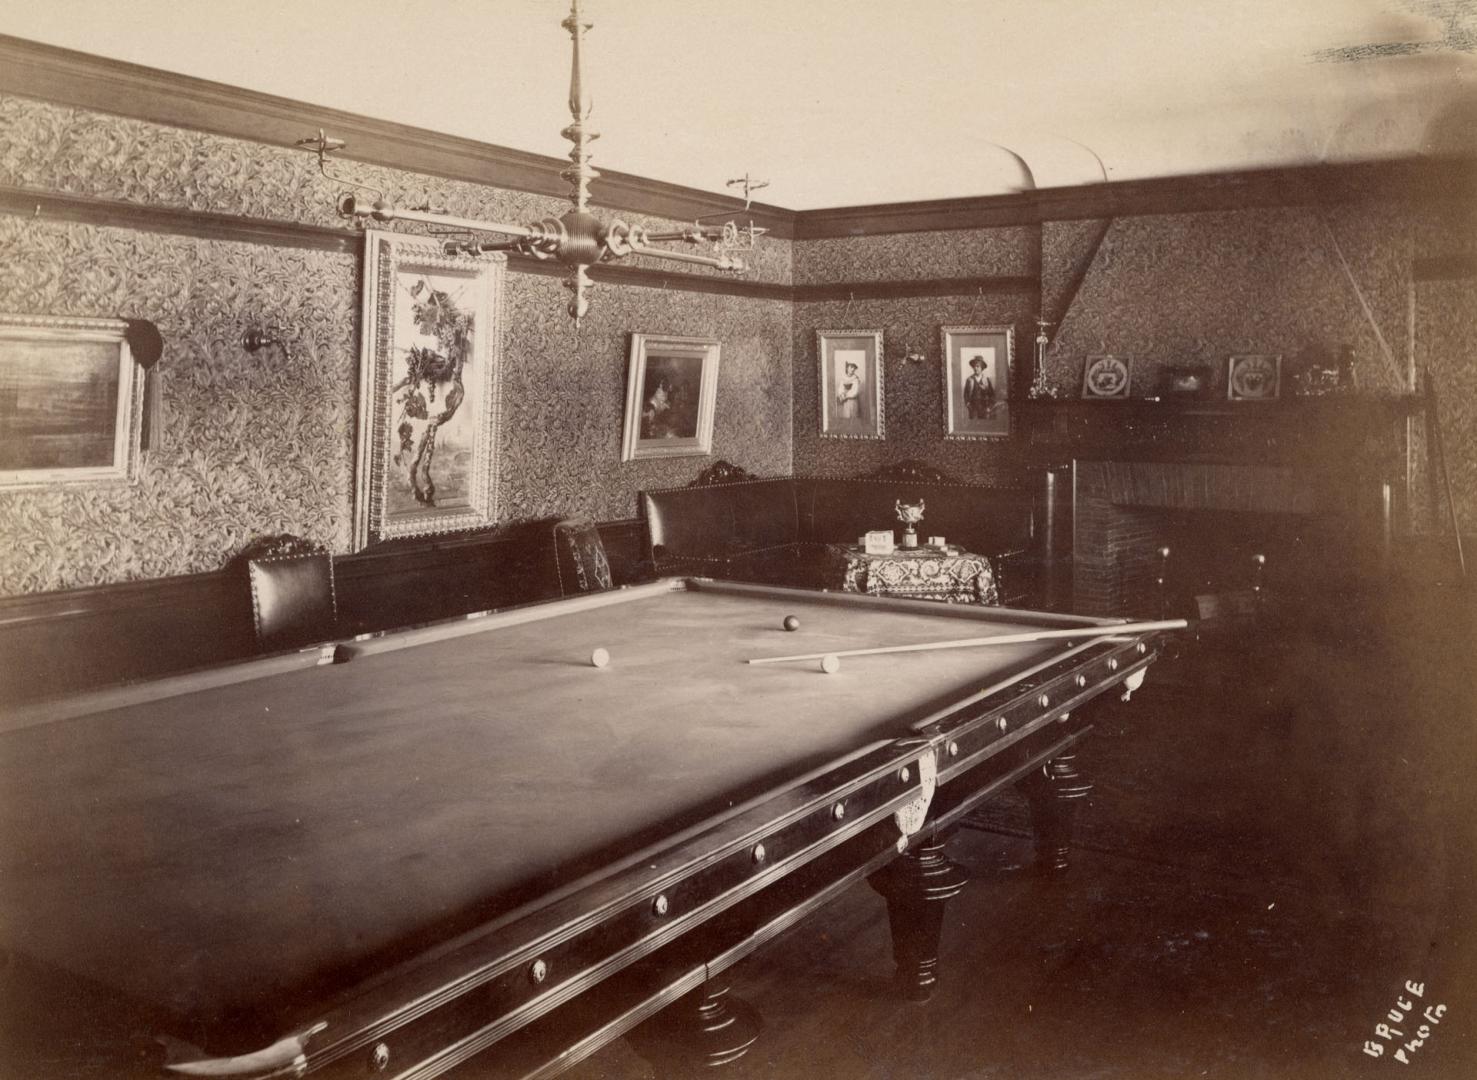 Image shows an interior of the billiard room.